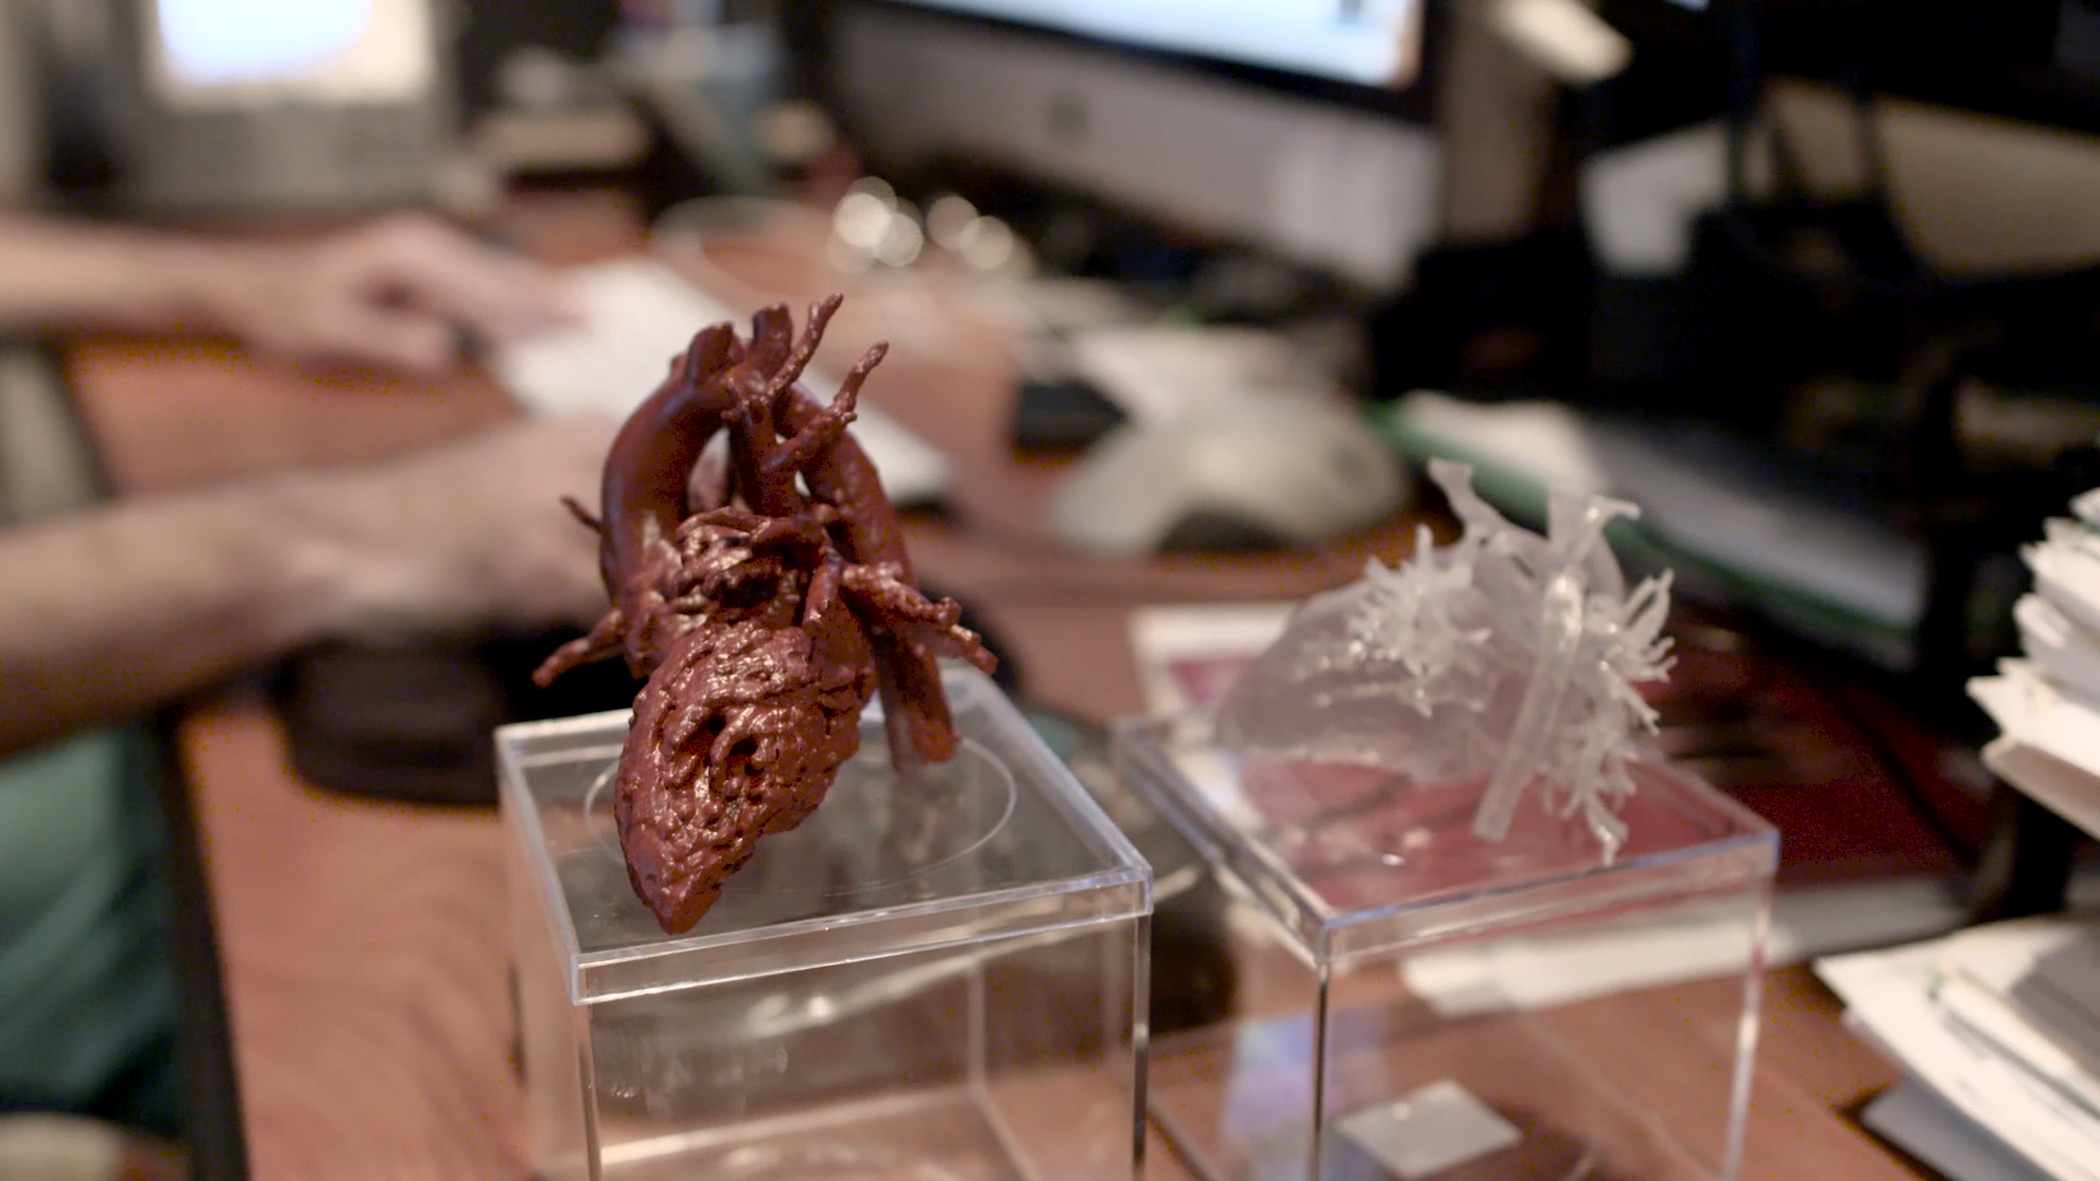 Mia’s 3D printed heart model was created with a Stratasys 3D Printer, enhancing surgical preparedness, reducing complications and decreasing operating time for the surgical team.